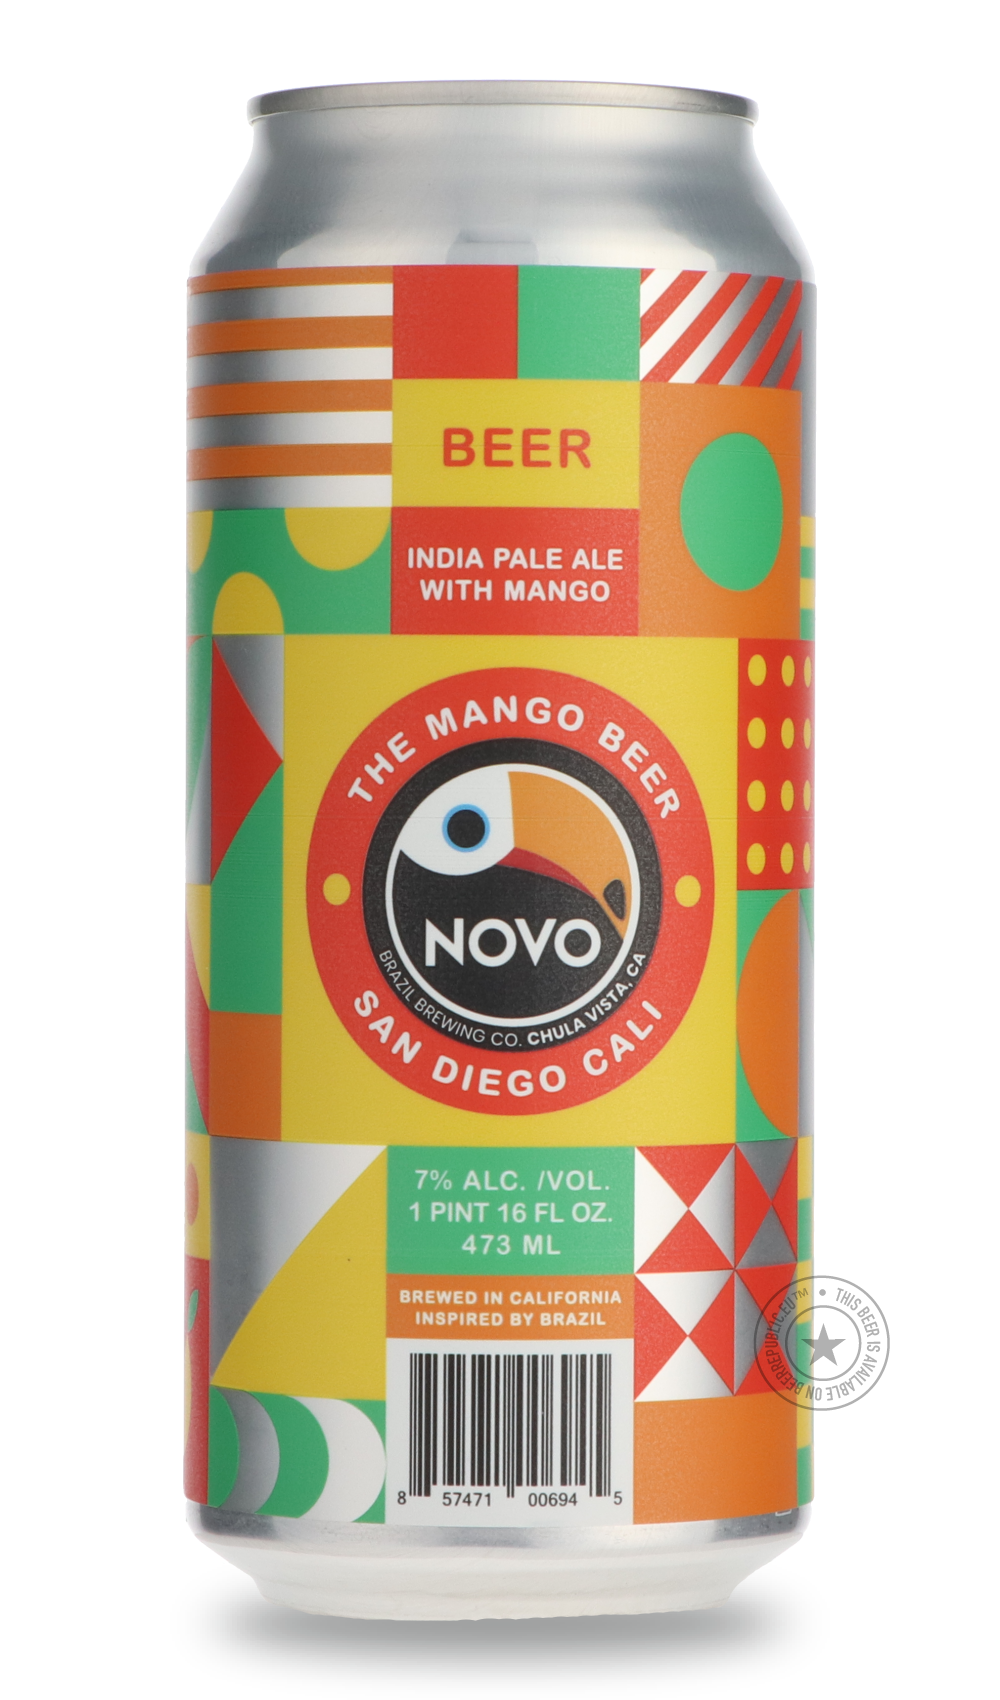 -Novo Brazil- The Mango Beer-IPA- Only @ Beer Republic - The best online beer store for American & Canadian craft beer - Buy beer online from the USA and Canada - Bier online kopen - Amerikaans bier kopen - Craft beer store - Craft beer kopen - Amerikanisch bier kaufen - Bier online kaufen - Acheter biere online - IPA - Stout - Porter - New England IPA - Hazy IPA - Imperial Stout - Barrel Aged - Barrel Aged Imperial Stout - Brown - Dark beer - Blond - Blonde - Pilsner - Lager - Wheat - Weizen - Amber - Barl